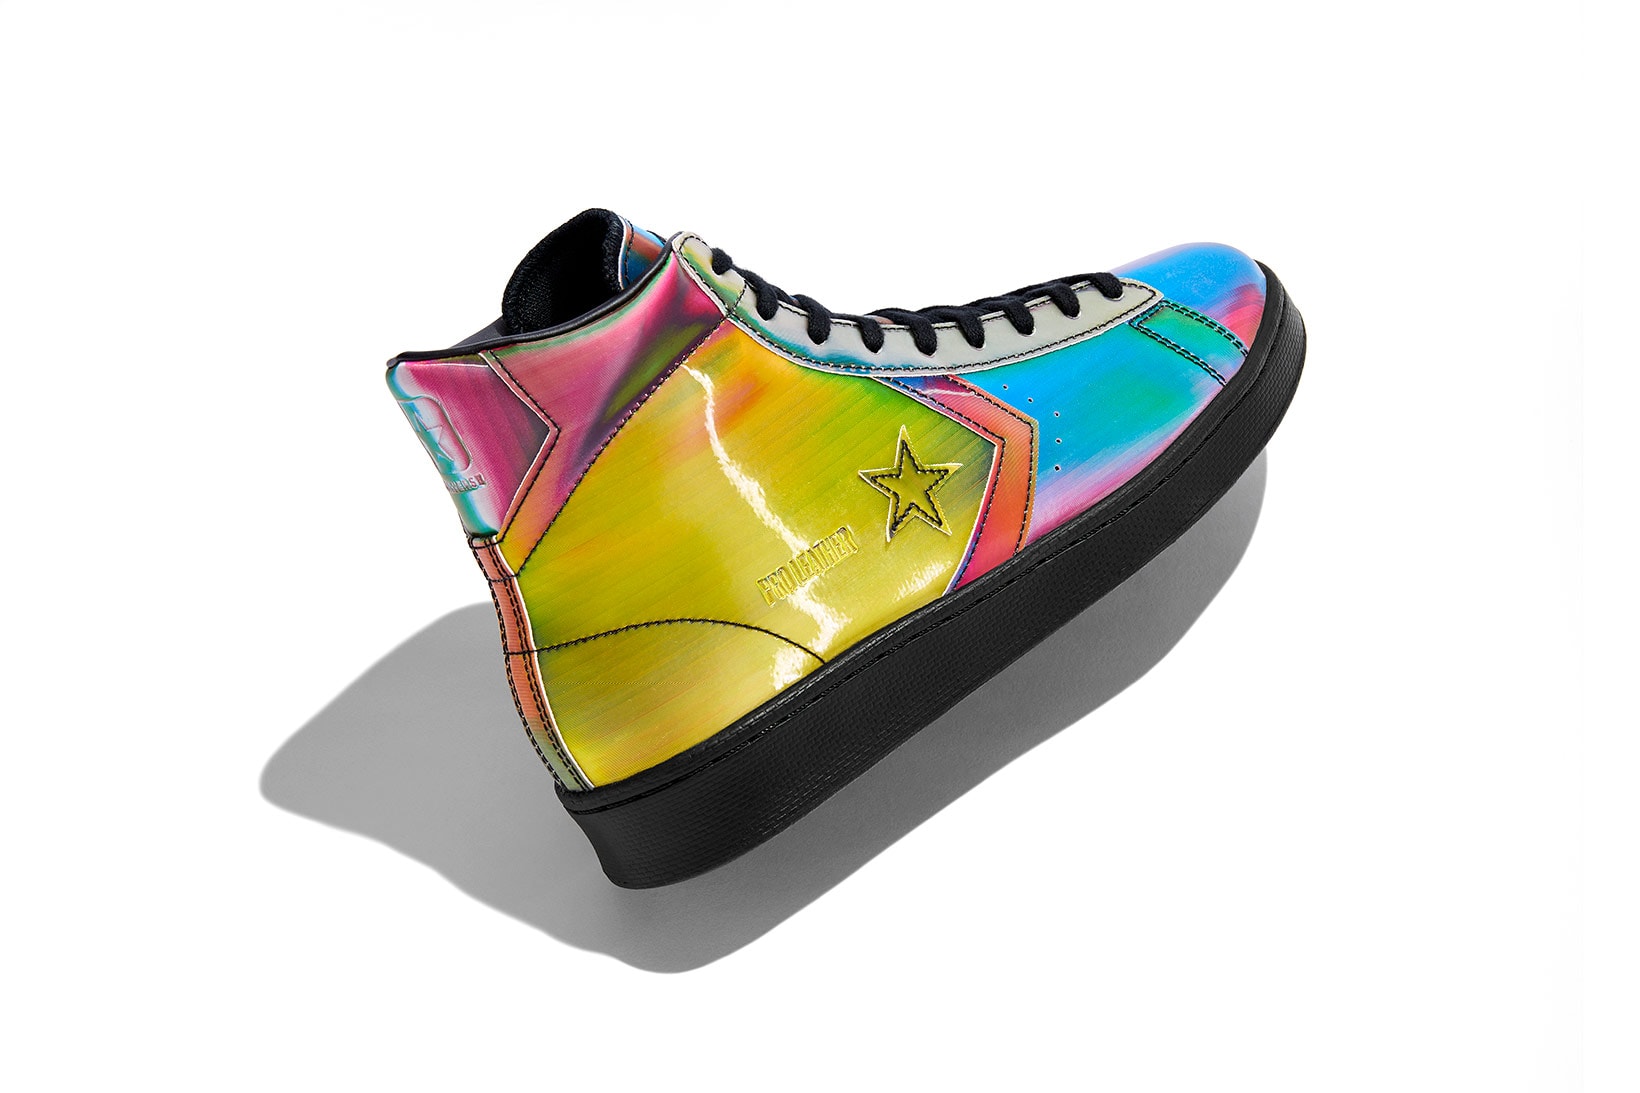 converse spring summer basketball collection high top lateral g4 low yellow pink blue